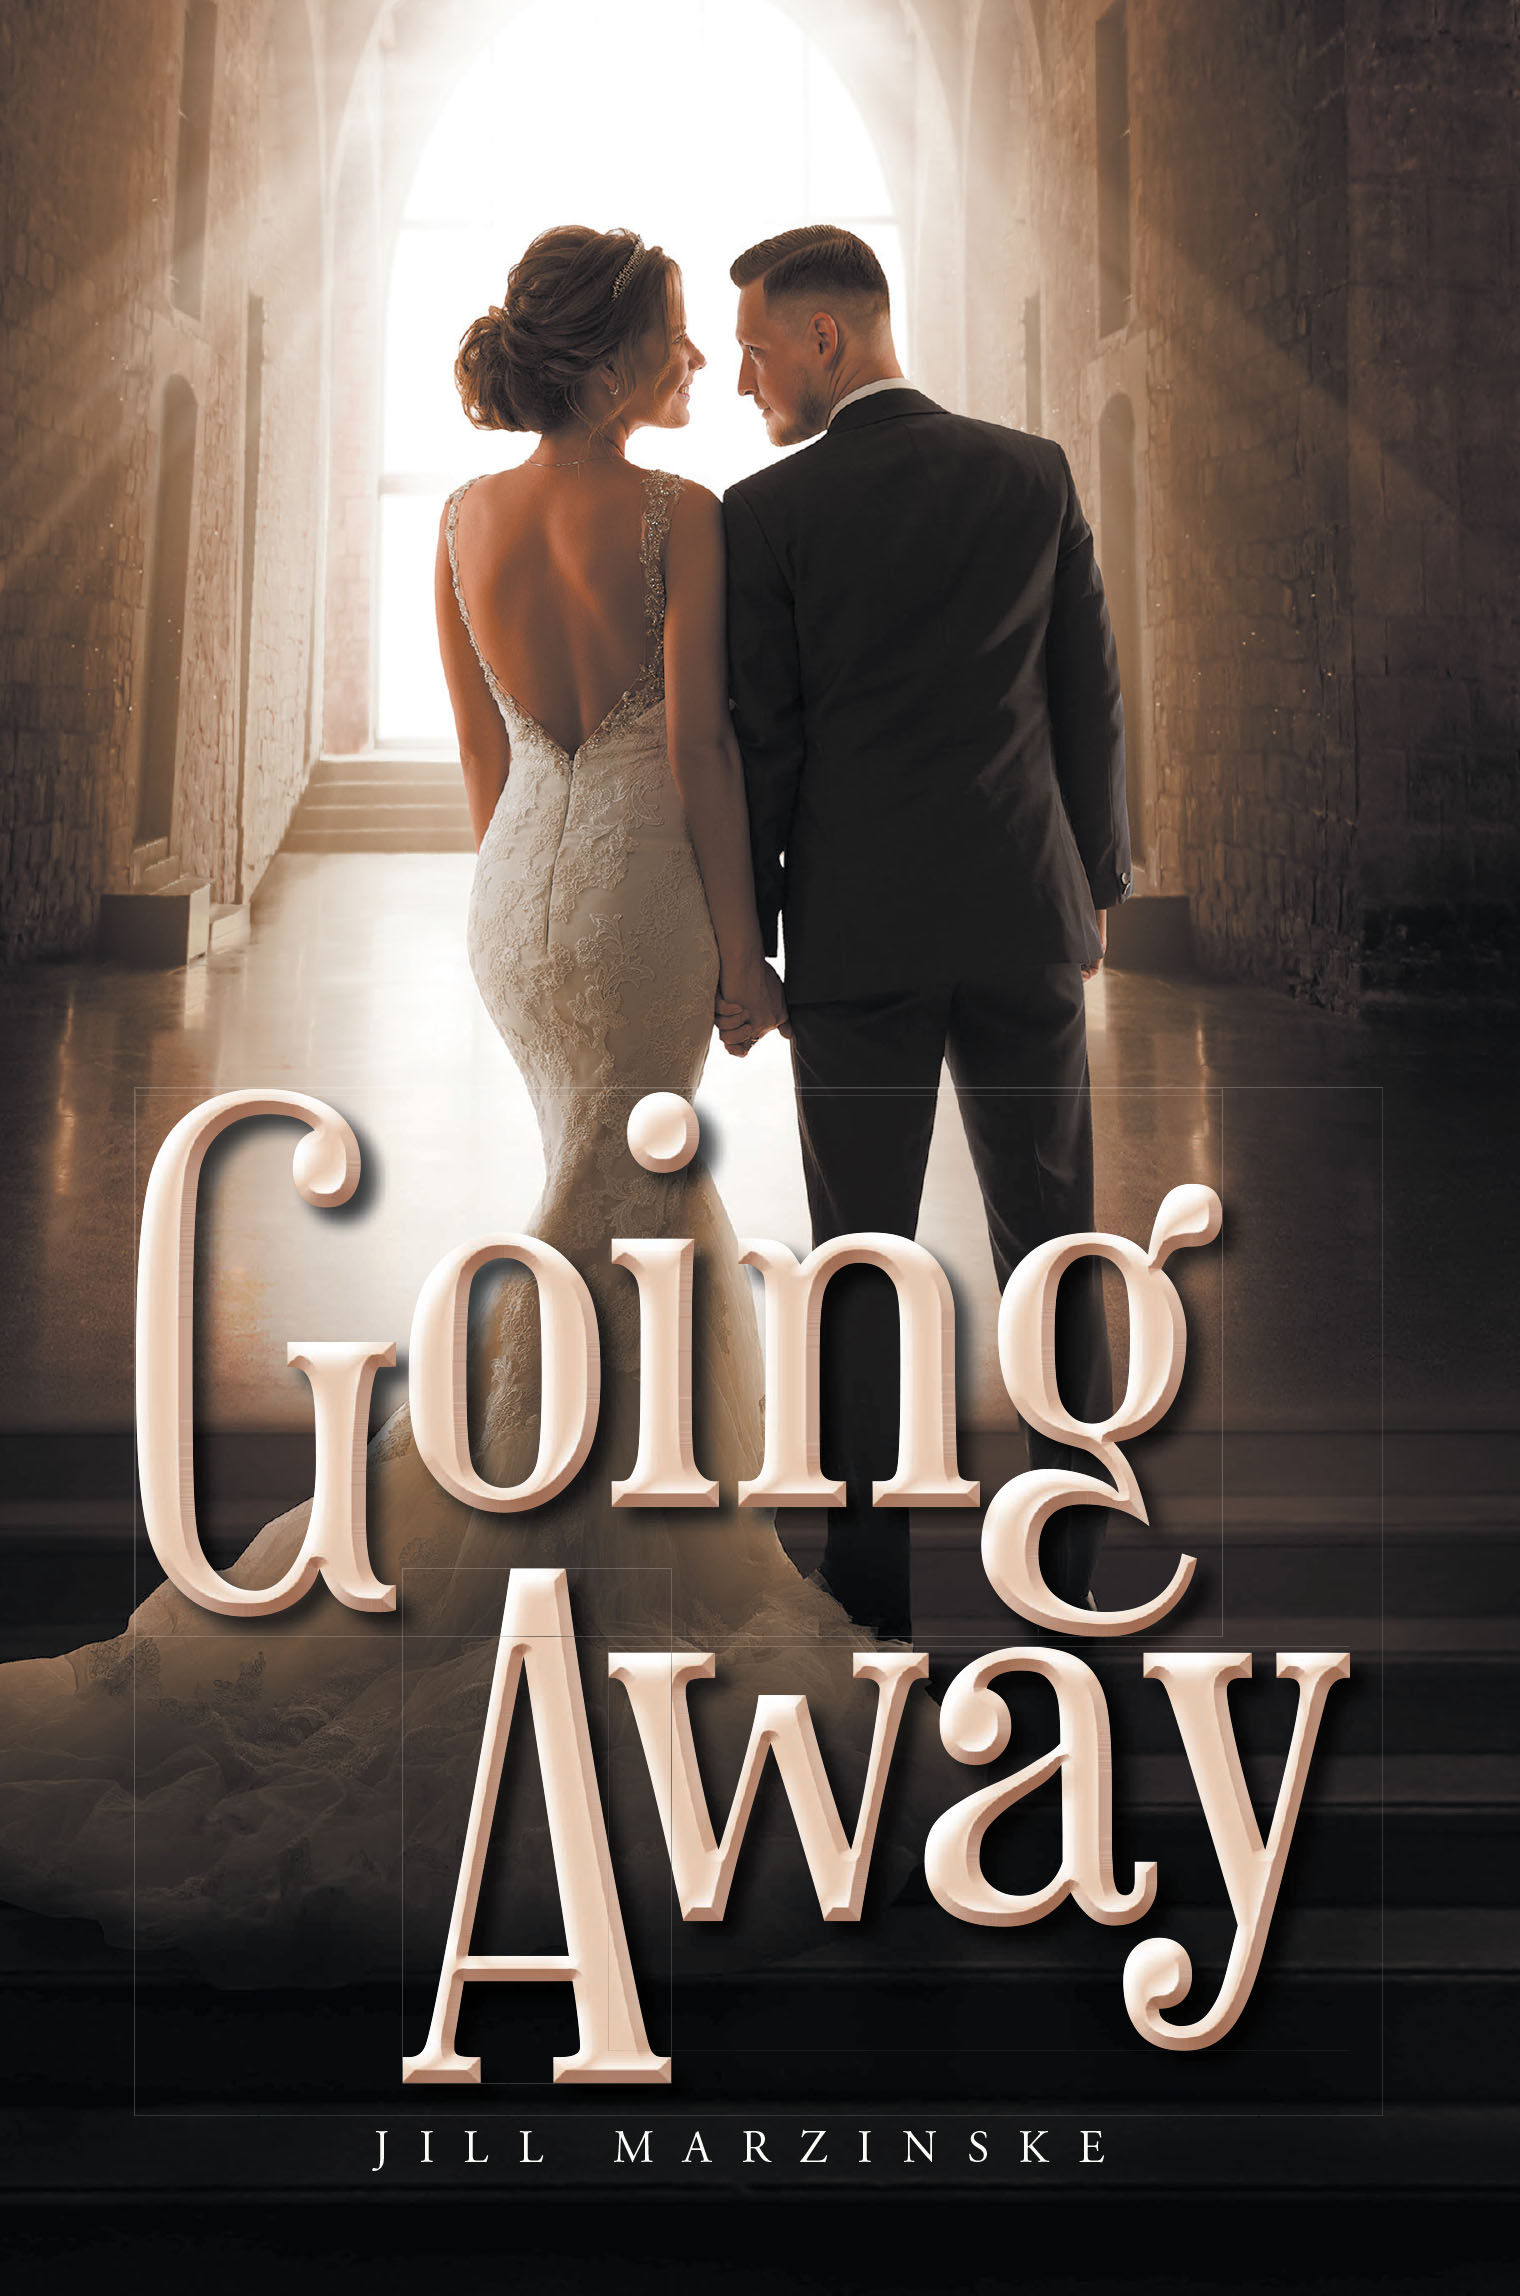 Author Jill Marzinske’s New Book, "Going Away," is a Powerful Story That Tackles the Various Feelings That Arise as One Realizes They Are Growing Up and No Longer a Child